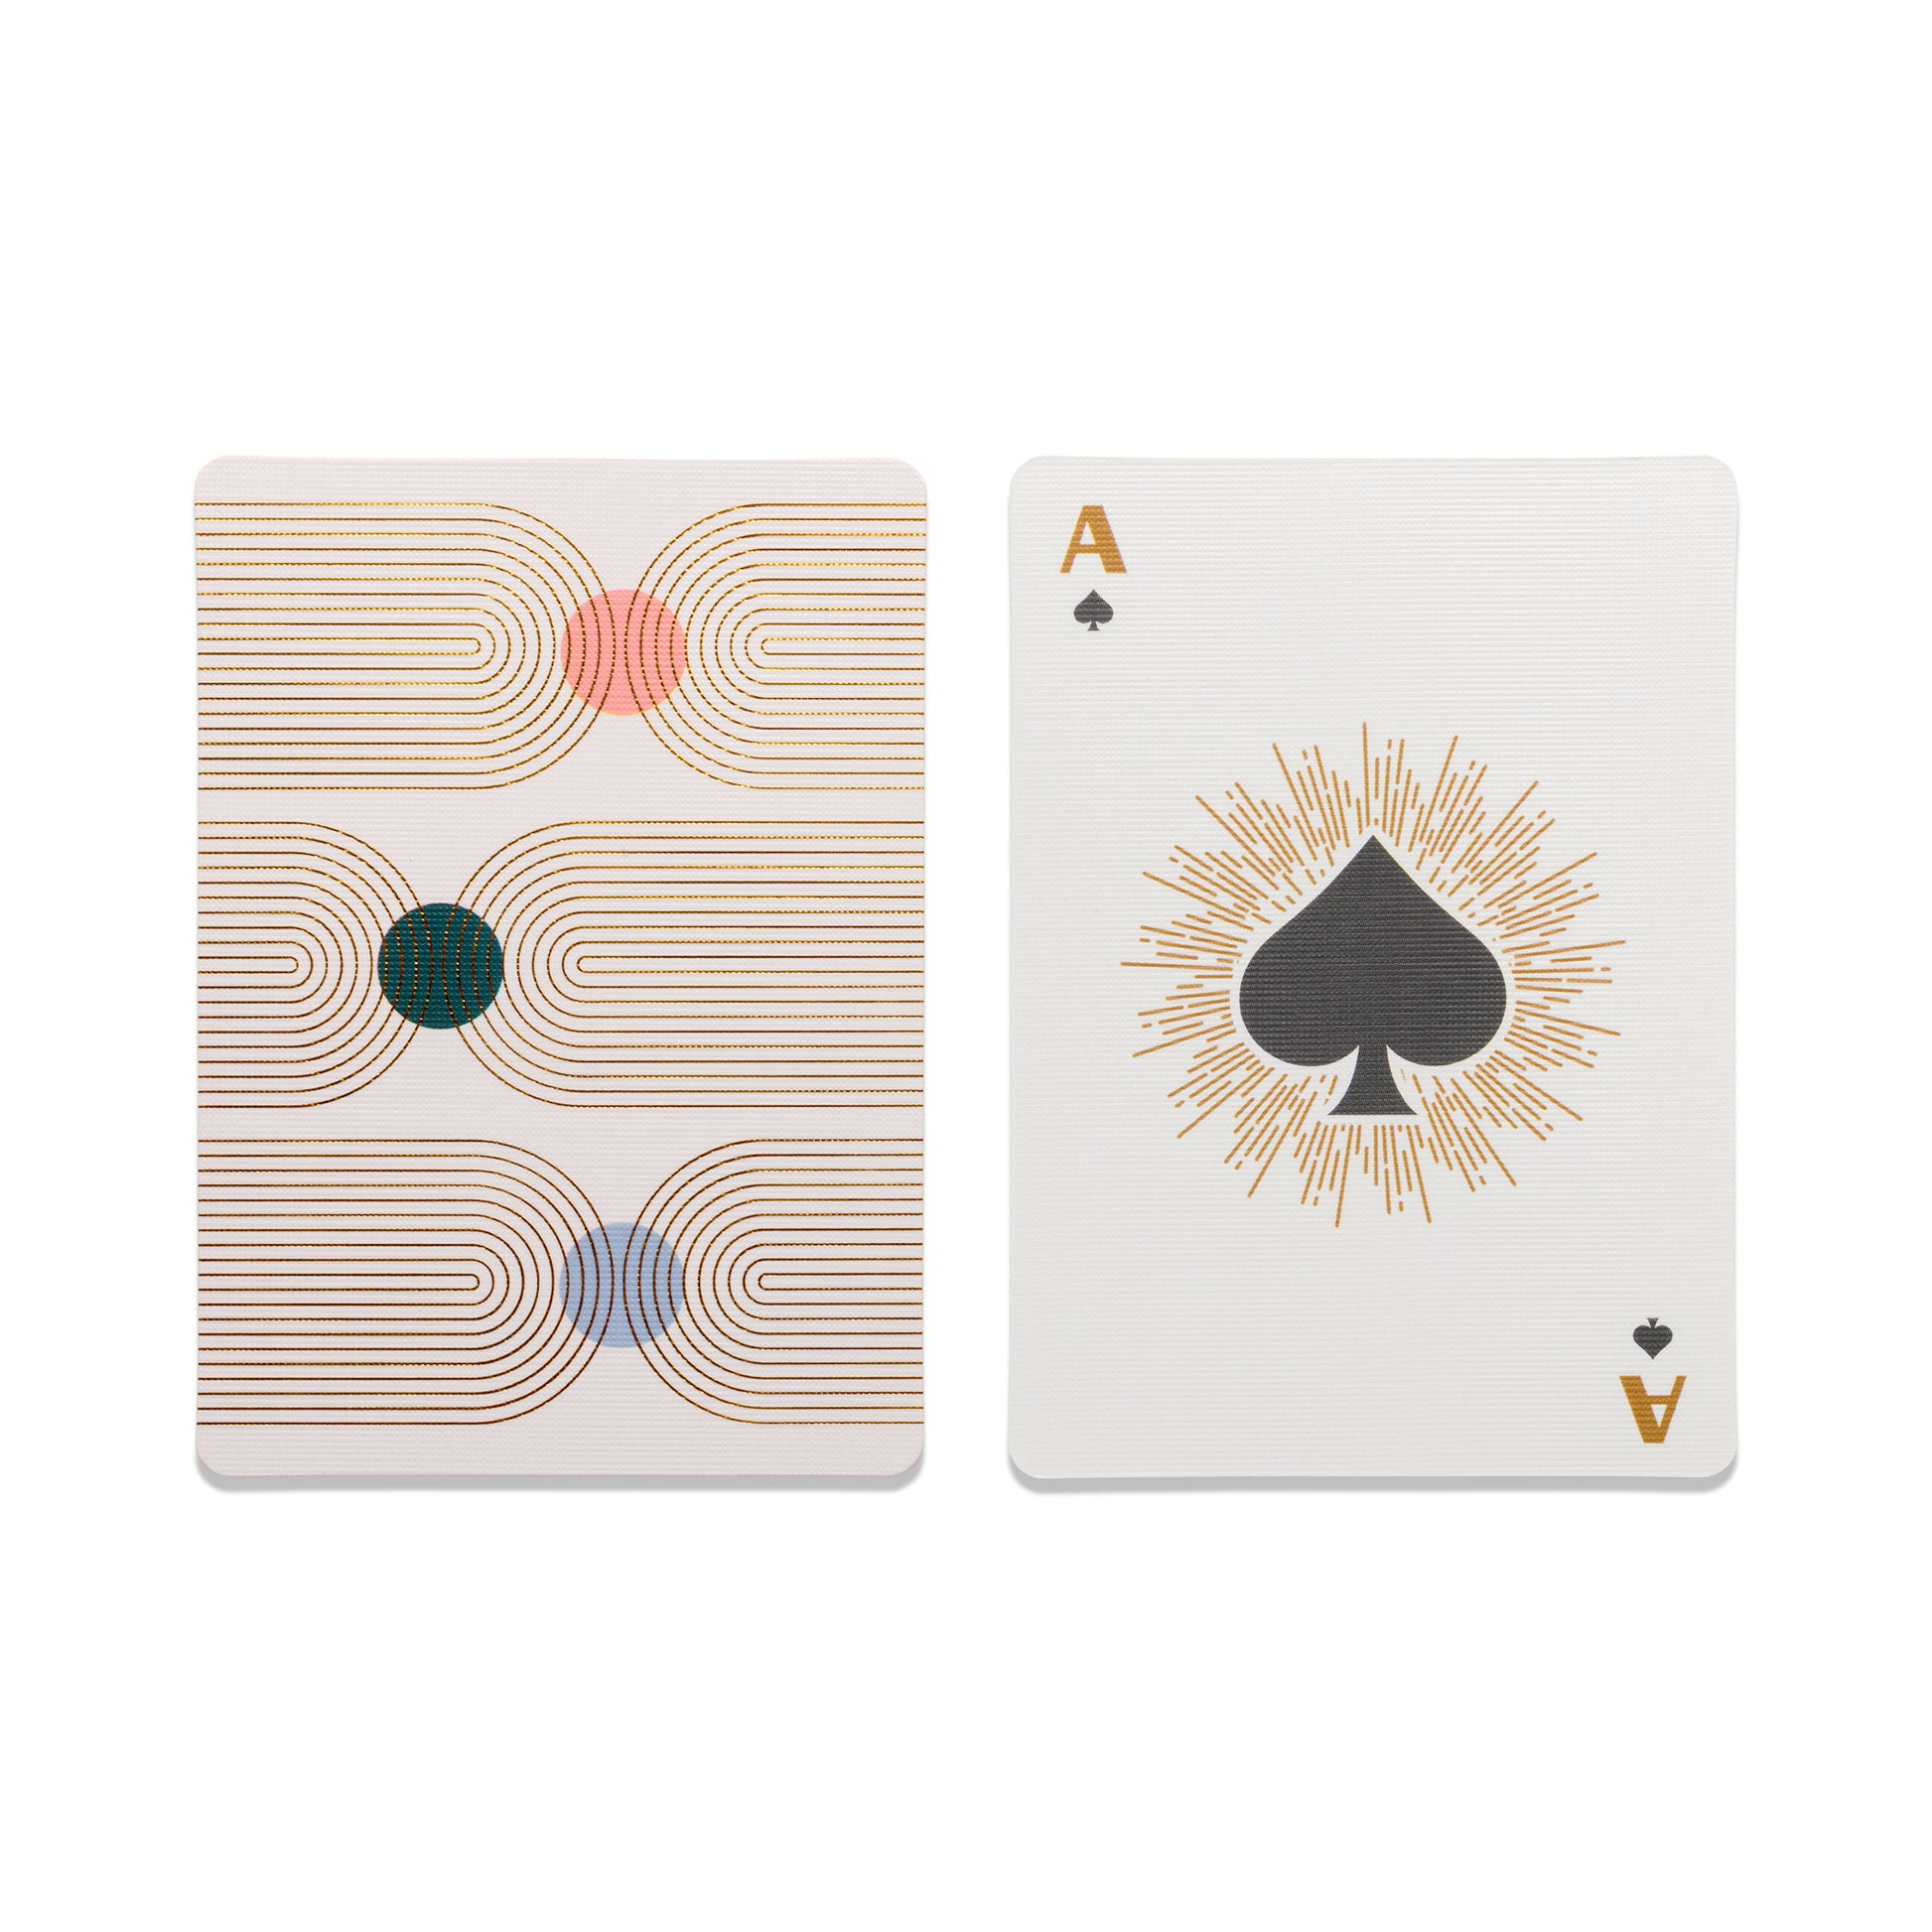 Playing Cards - Arches - one face down card with geometric design and ace of spades face up